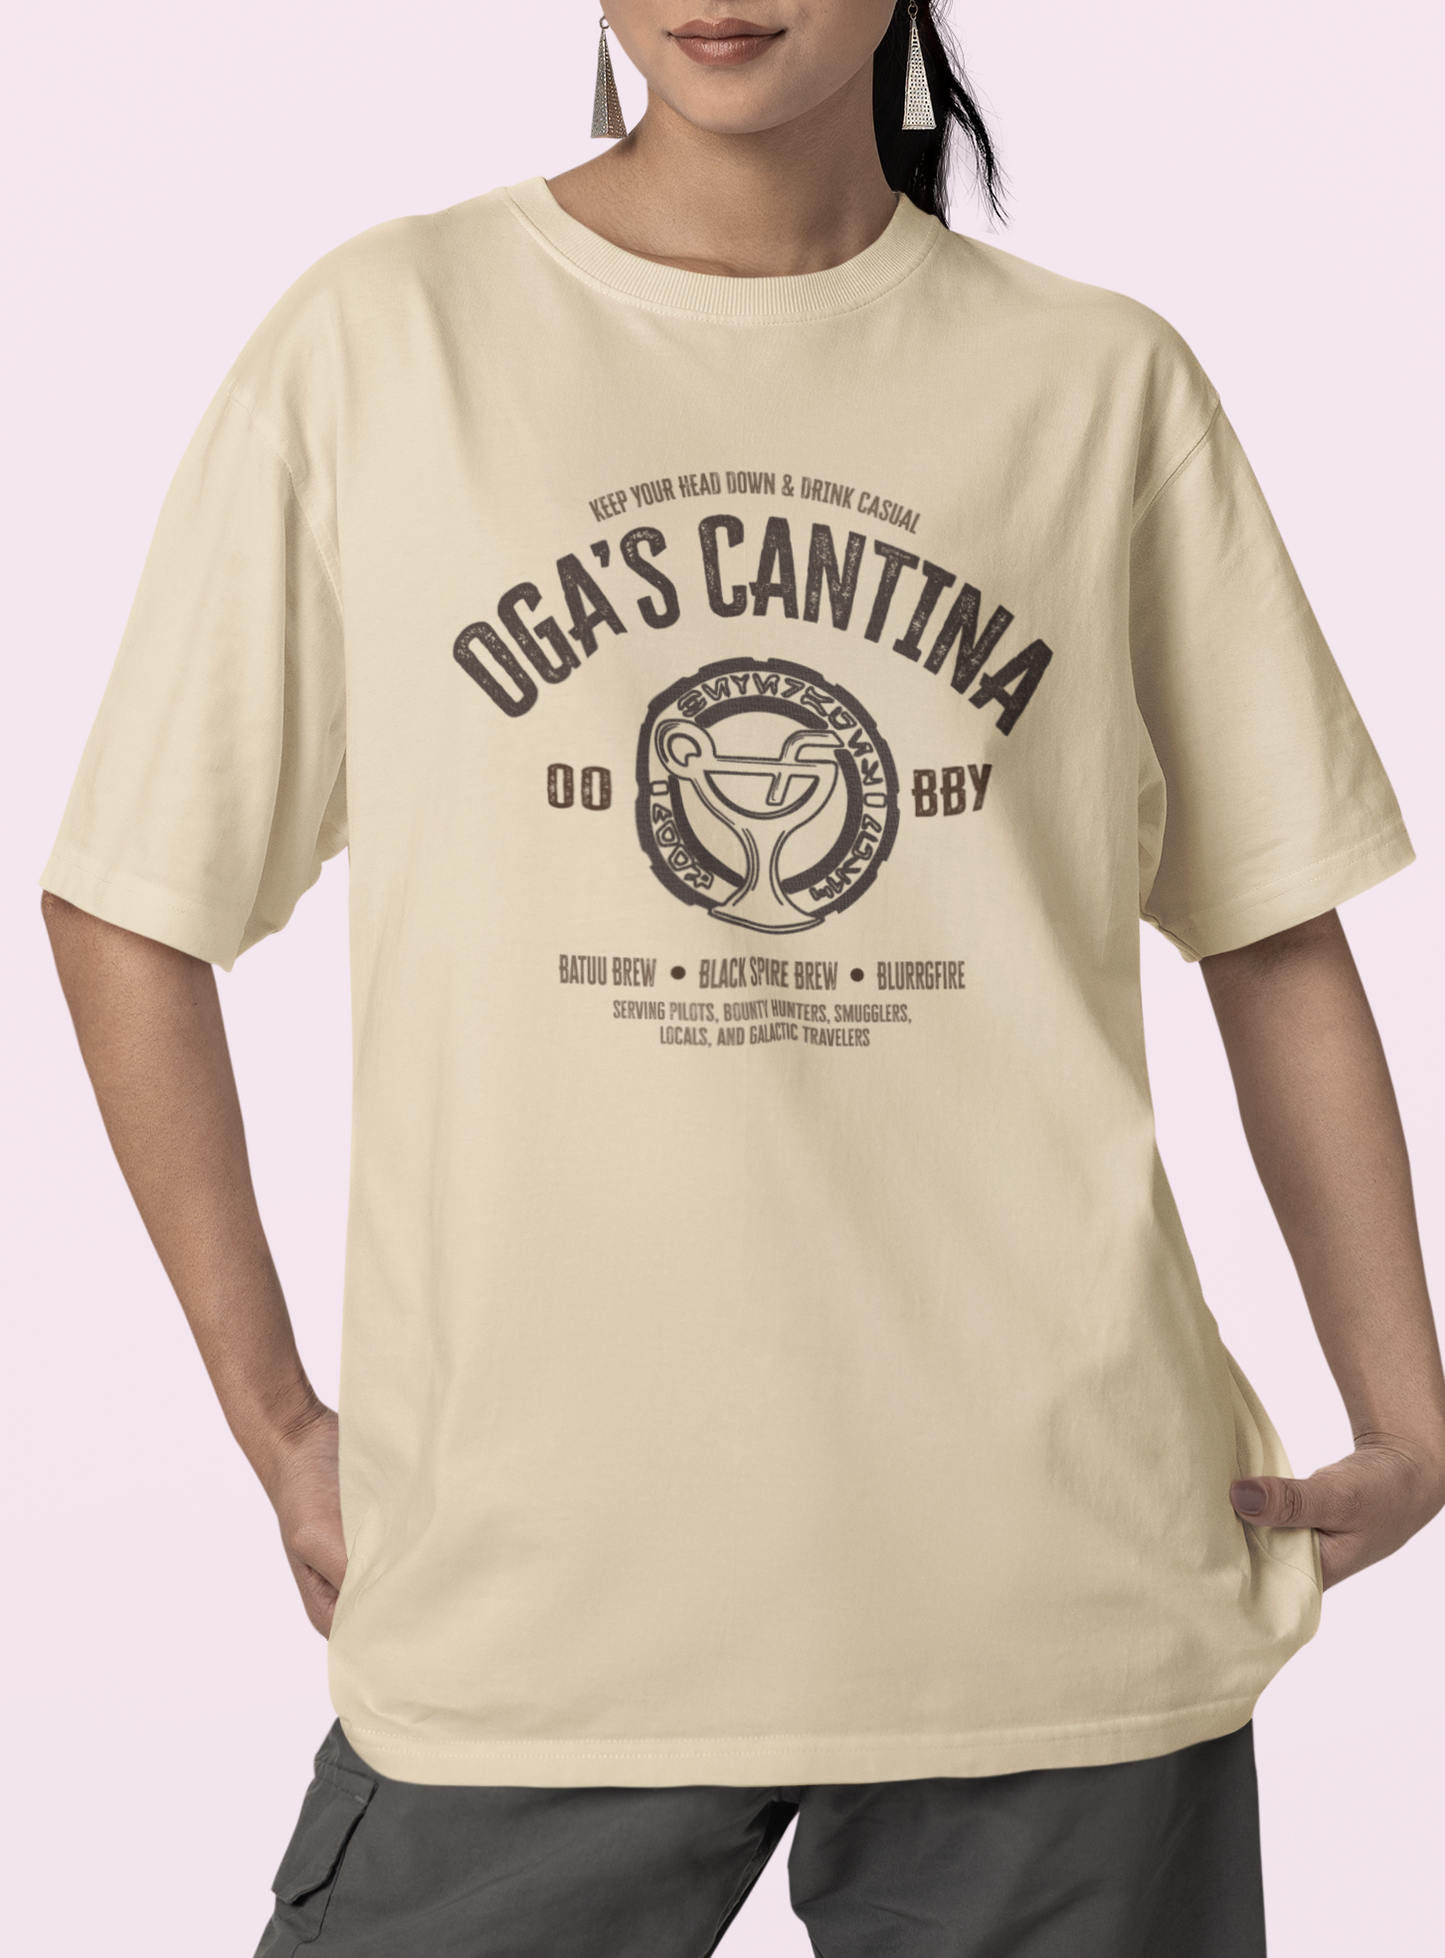 Cantina Vintage Graphic Tee